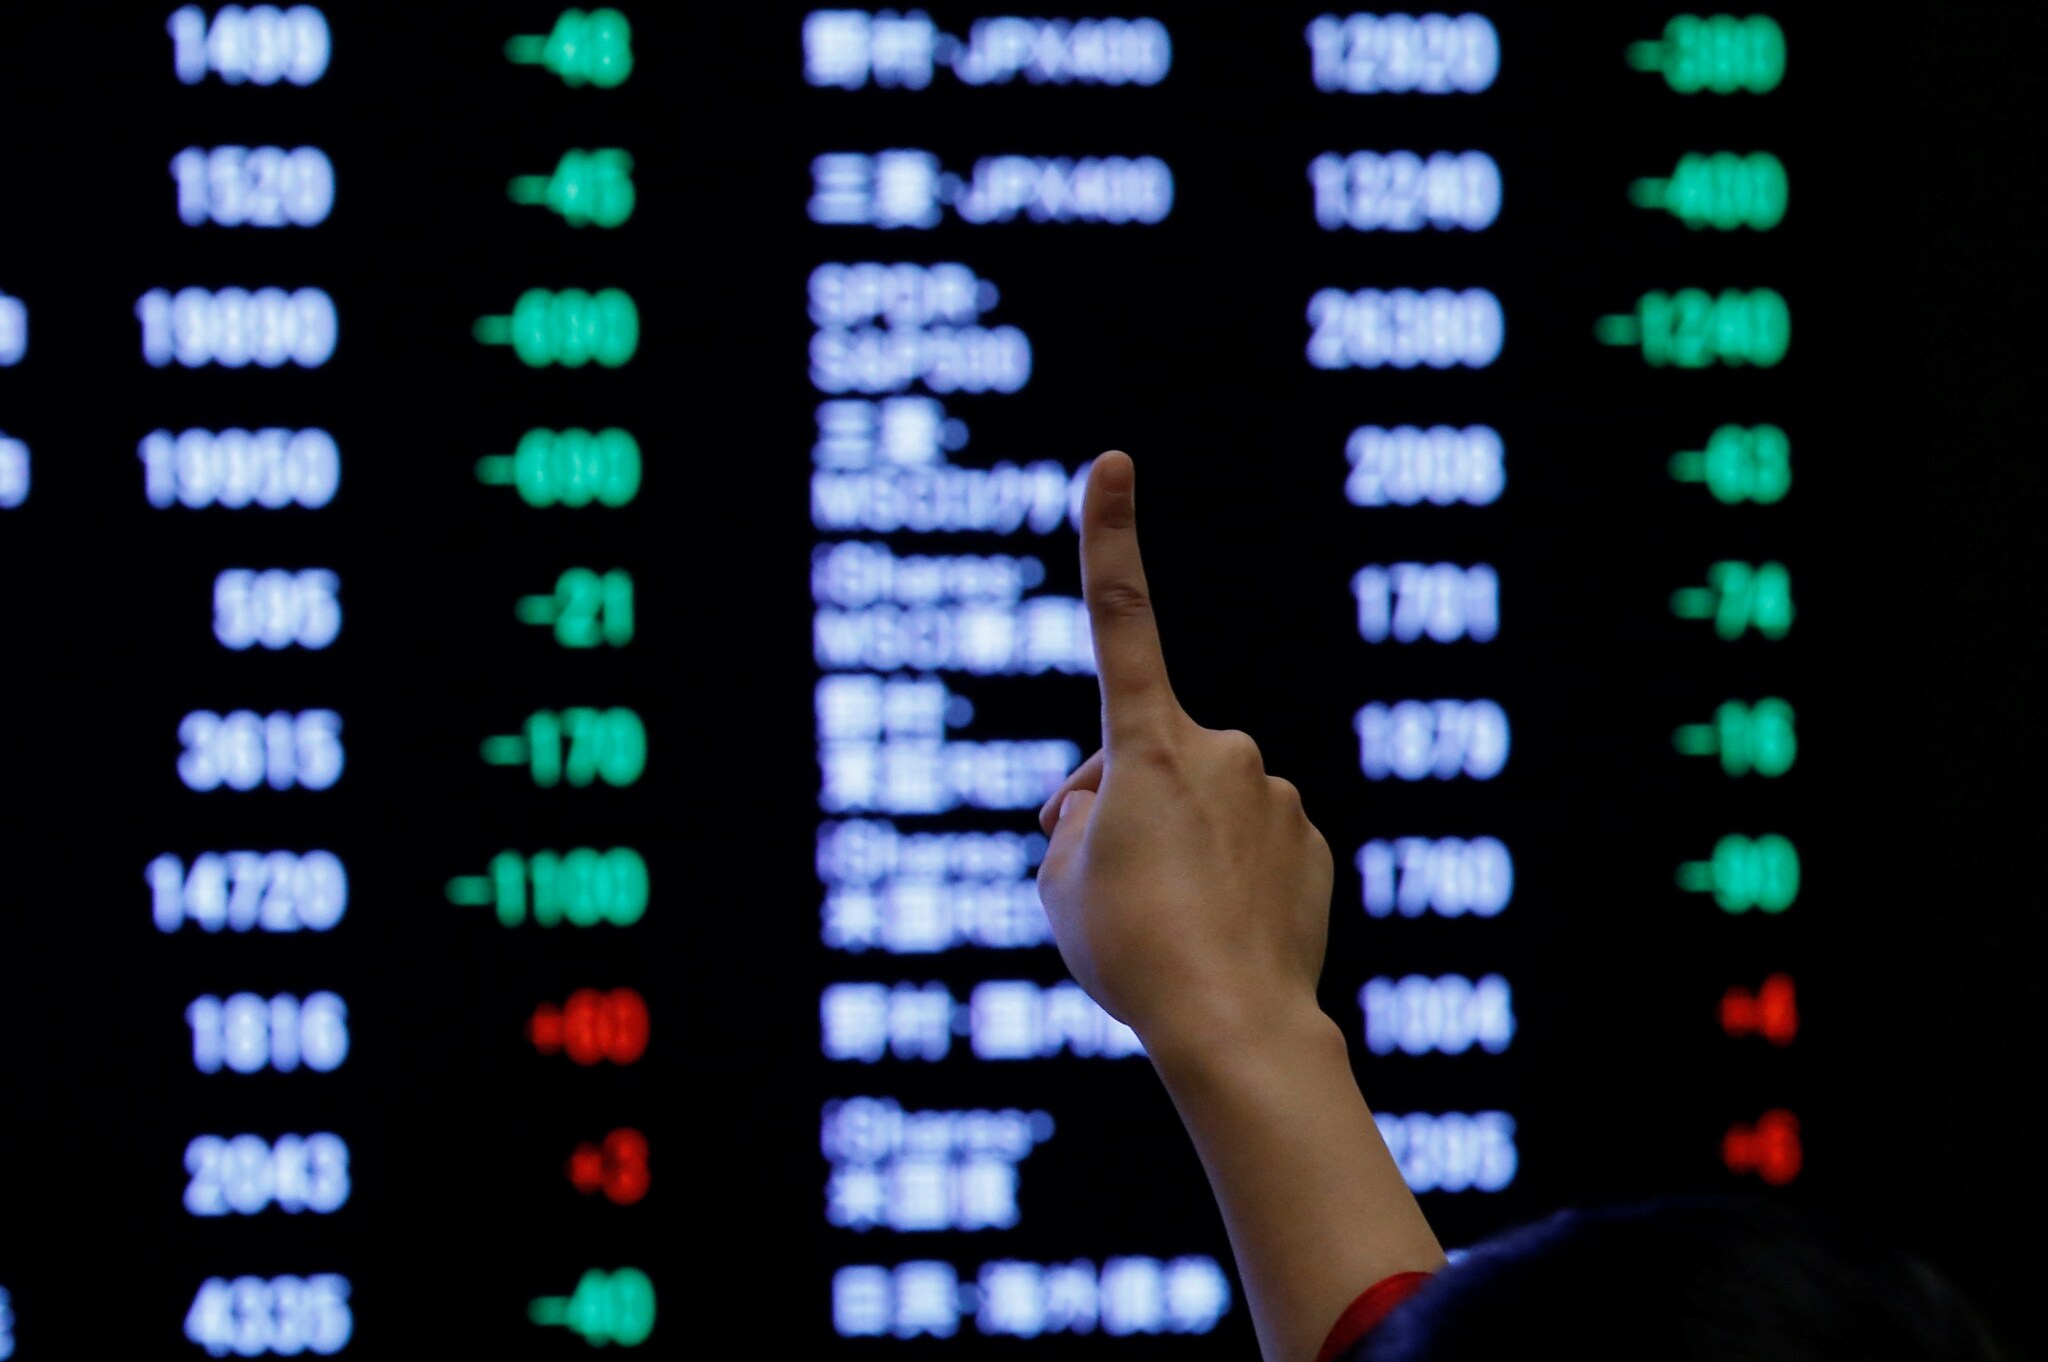 A woman points to an electronic board showing stock prices as she poses in front of the board at the Tokyo Stock Exchange (TSE), in Tokyo, Japan, January 4, 2019. REUTERS/Kim Kyung-Hoon/File Photo